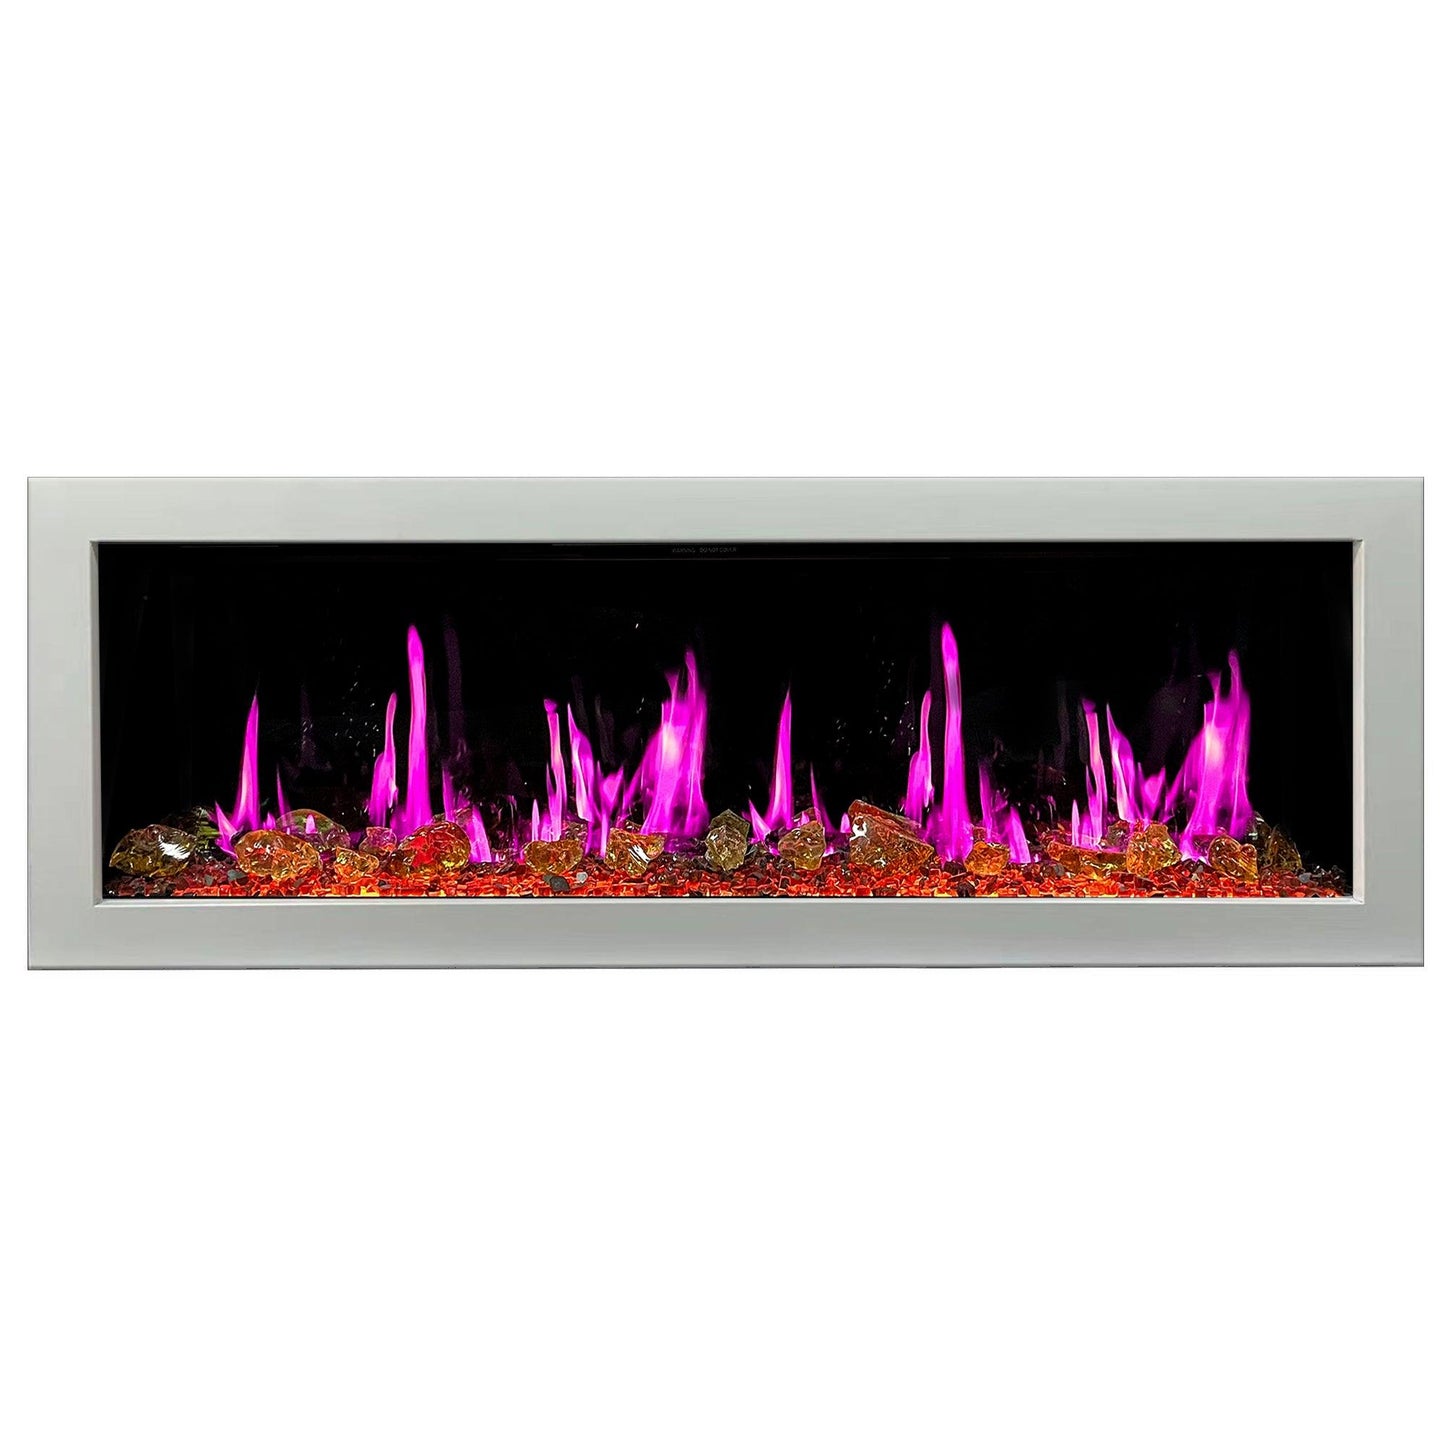 ZopaFlame™ 58" Linear Wall-mount Electric Fireplace - WG19588V - ZopaFlame Fireplaces